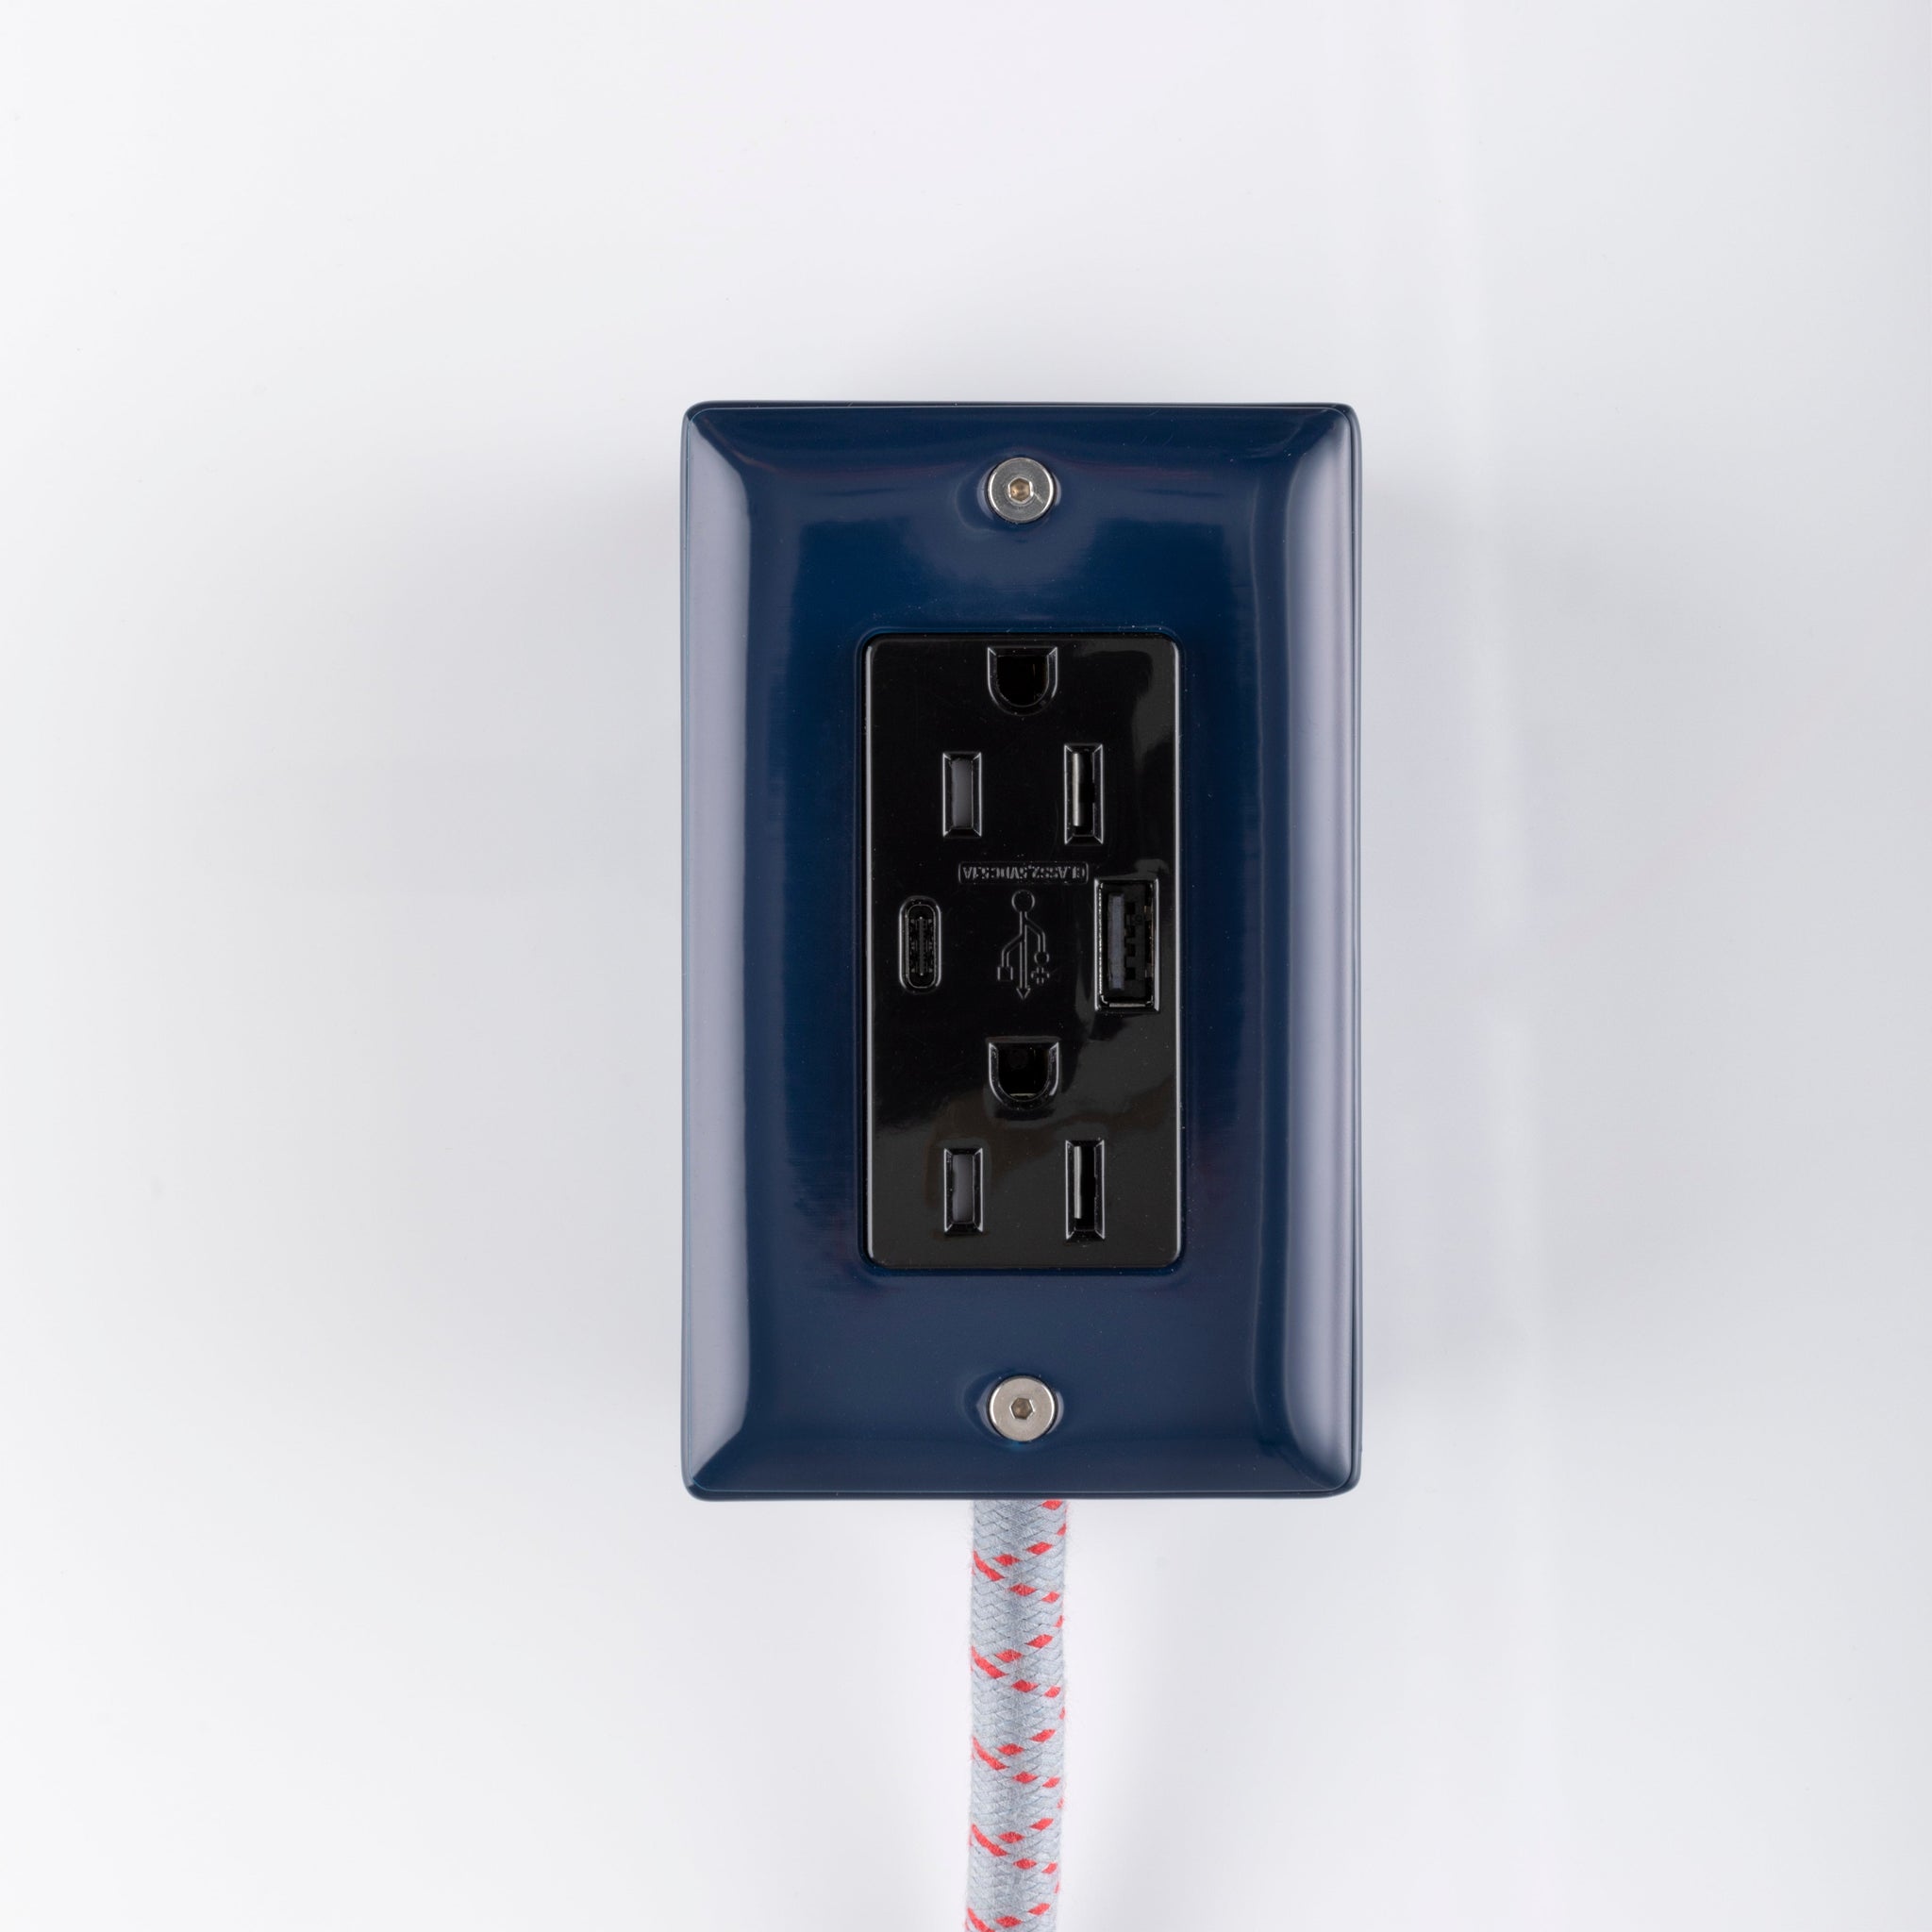 New! The First Smart Chip USB Type C® Navy Blue Extension Cord - 8' Extō USBA/USBC Port, Dual-Outlet Power Cord